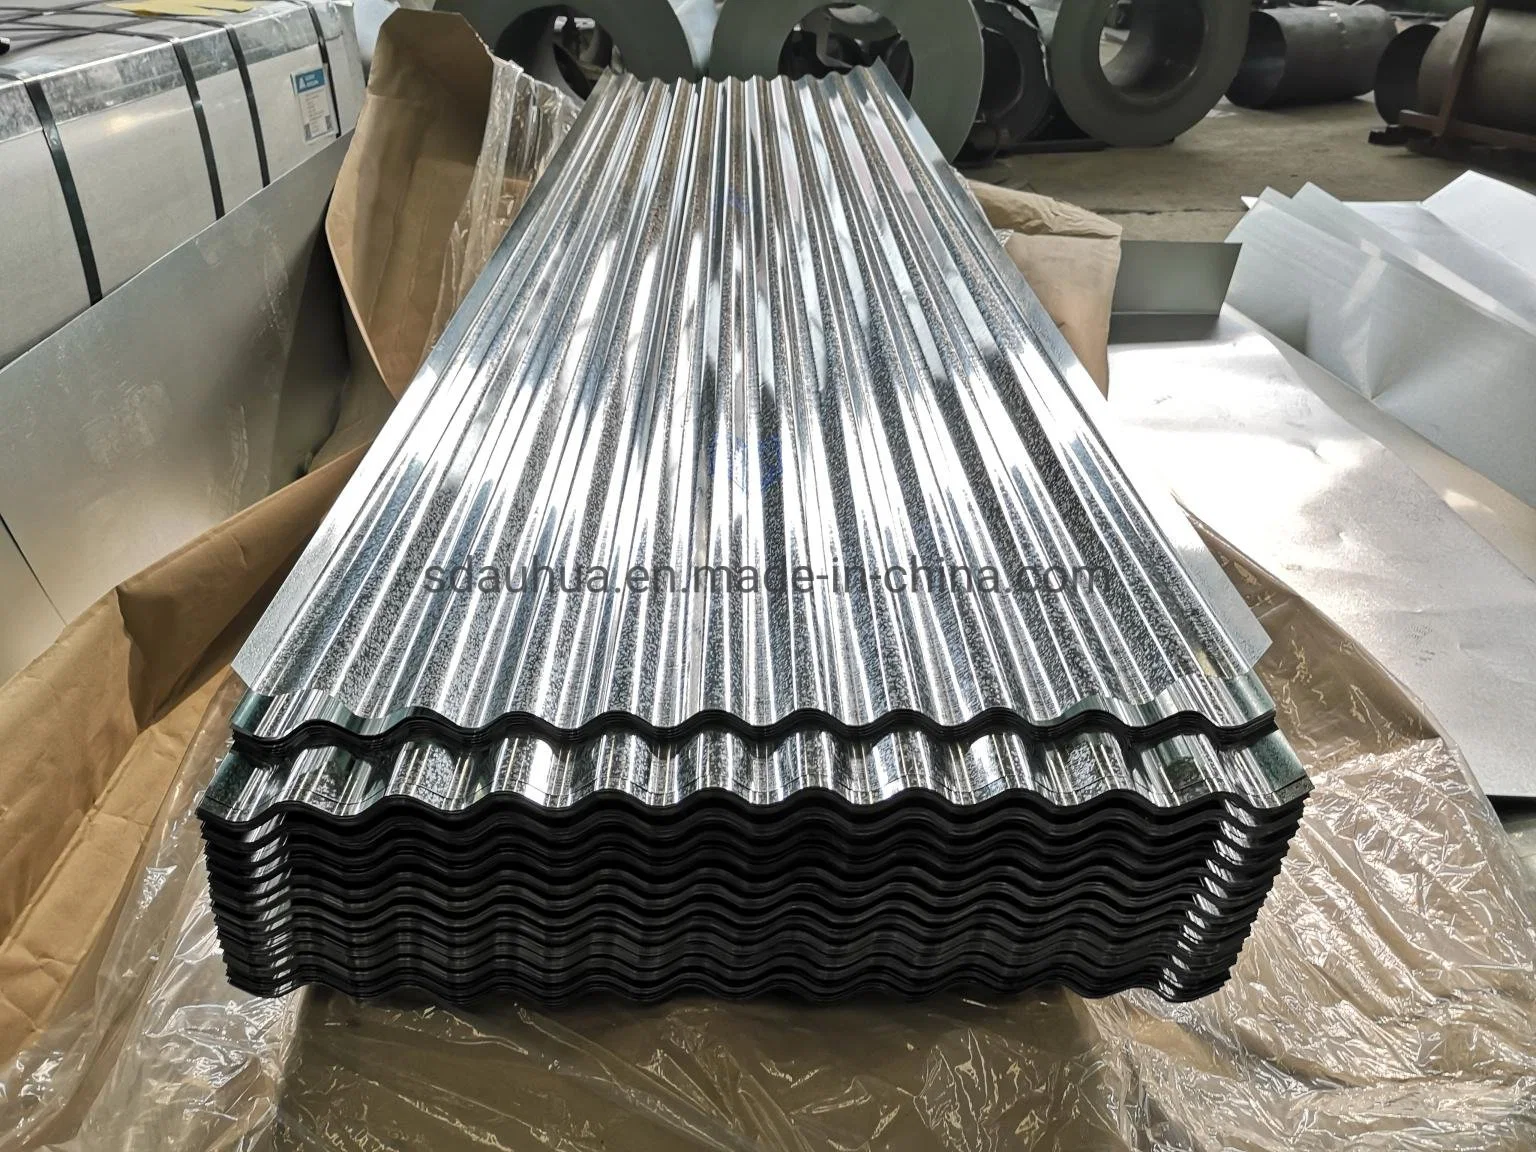 Prime Hot Dipped Galvanized Corrugated Sheet Steel Roofing Price Cold Rolled Iron Metal Greenhouse Building Material Zinc Coated